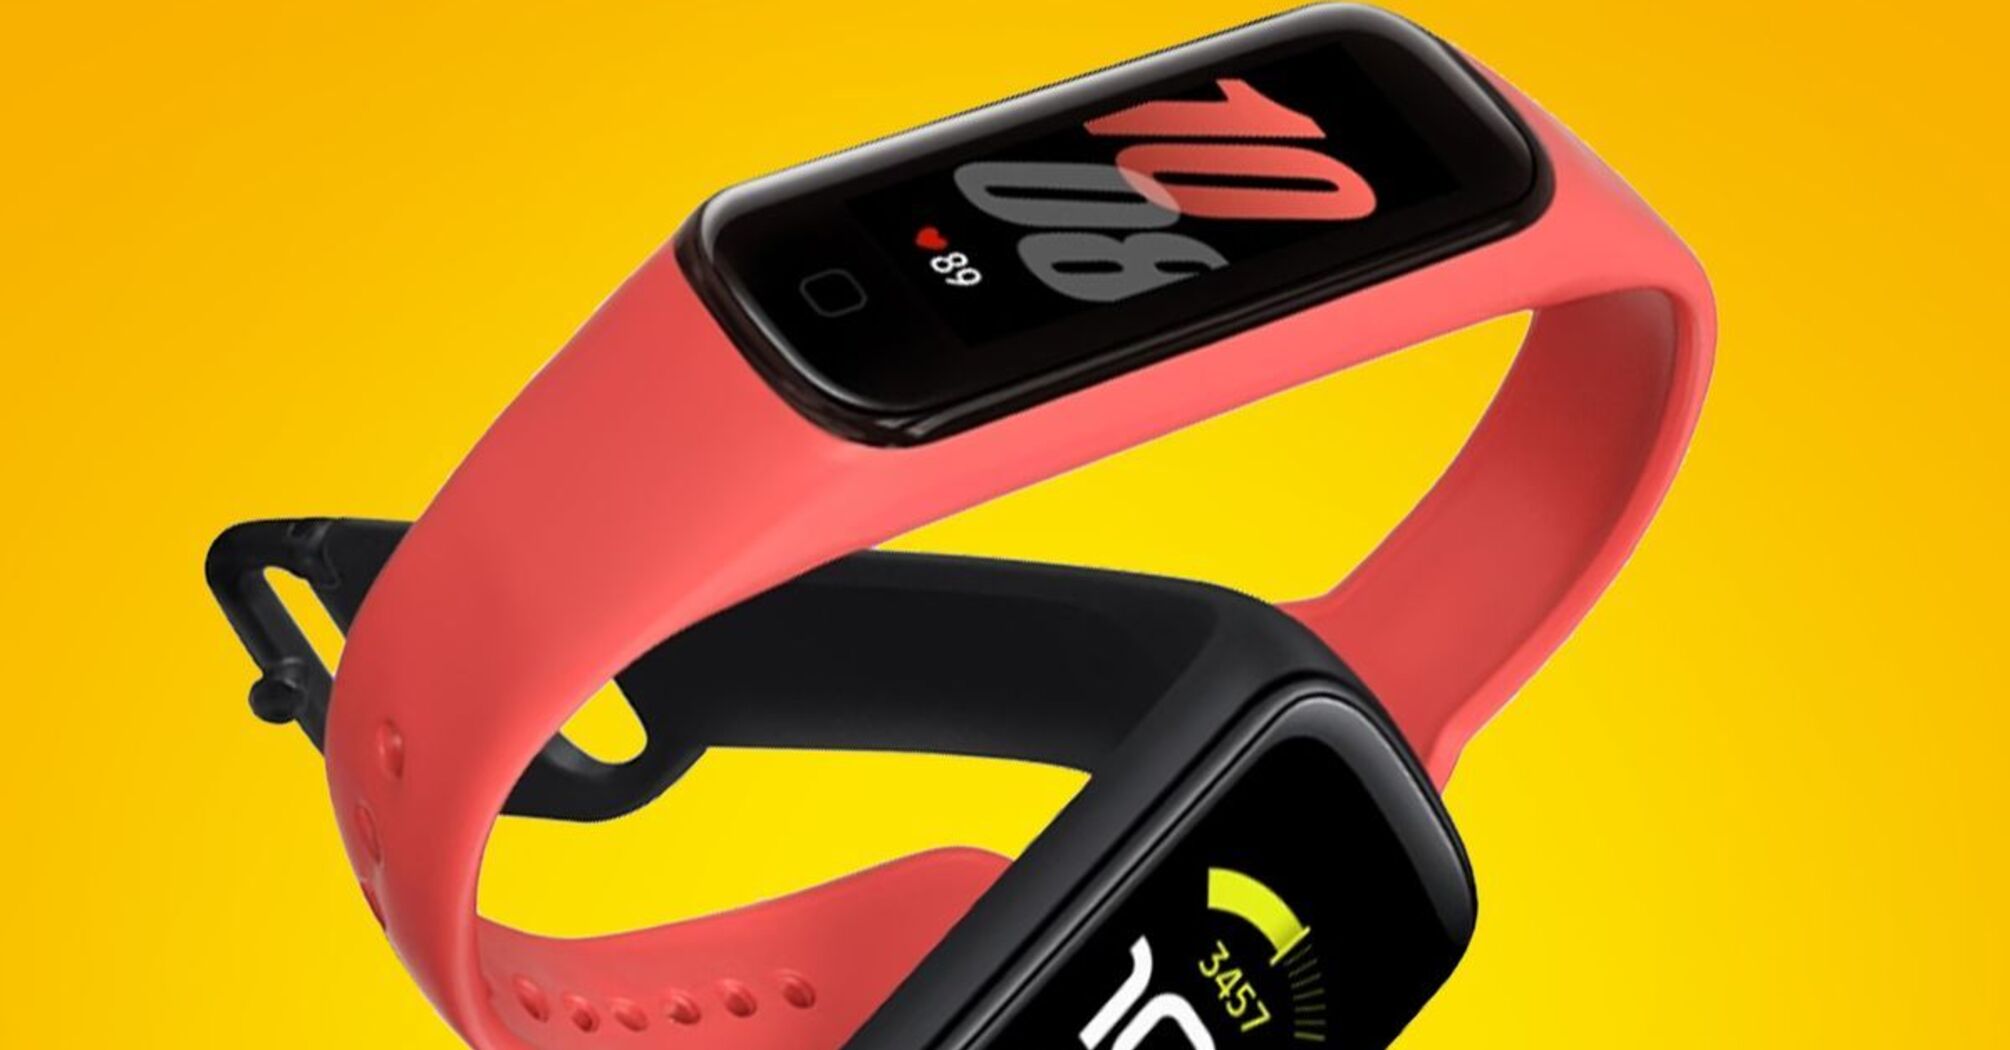 Samsung Galaxy Fit 3: key features revealed